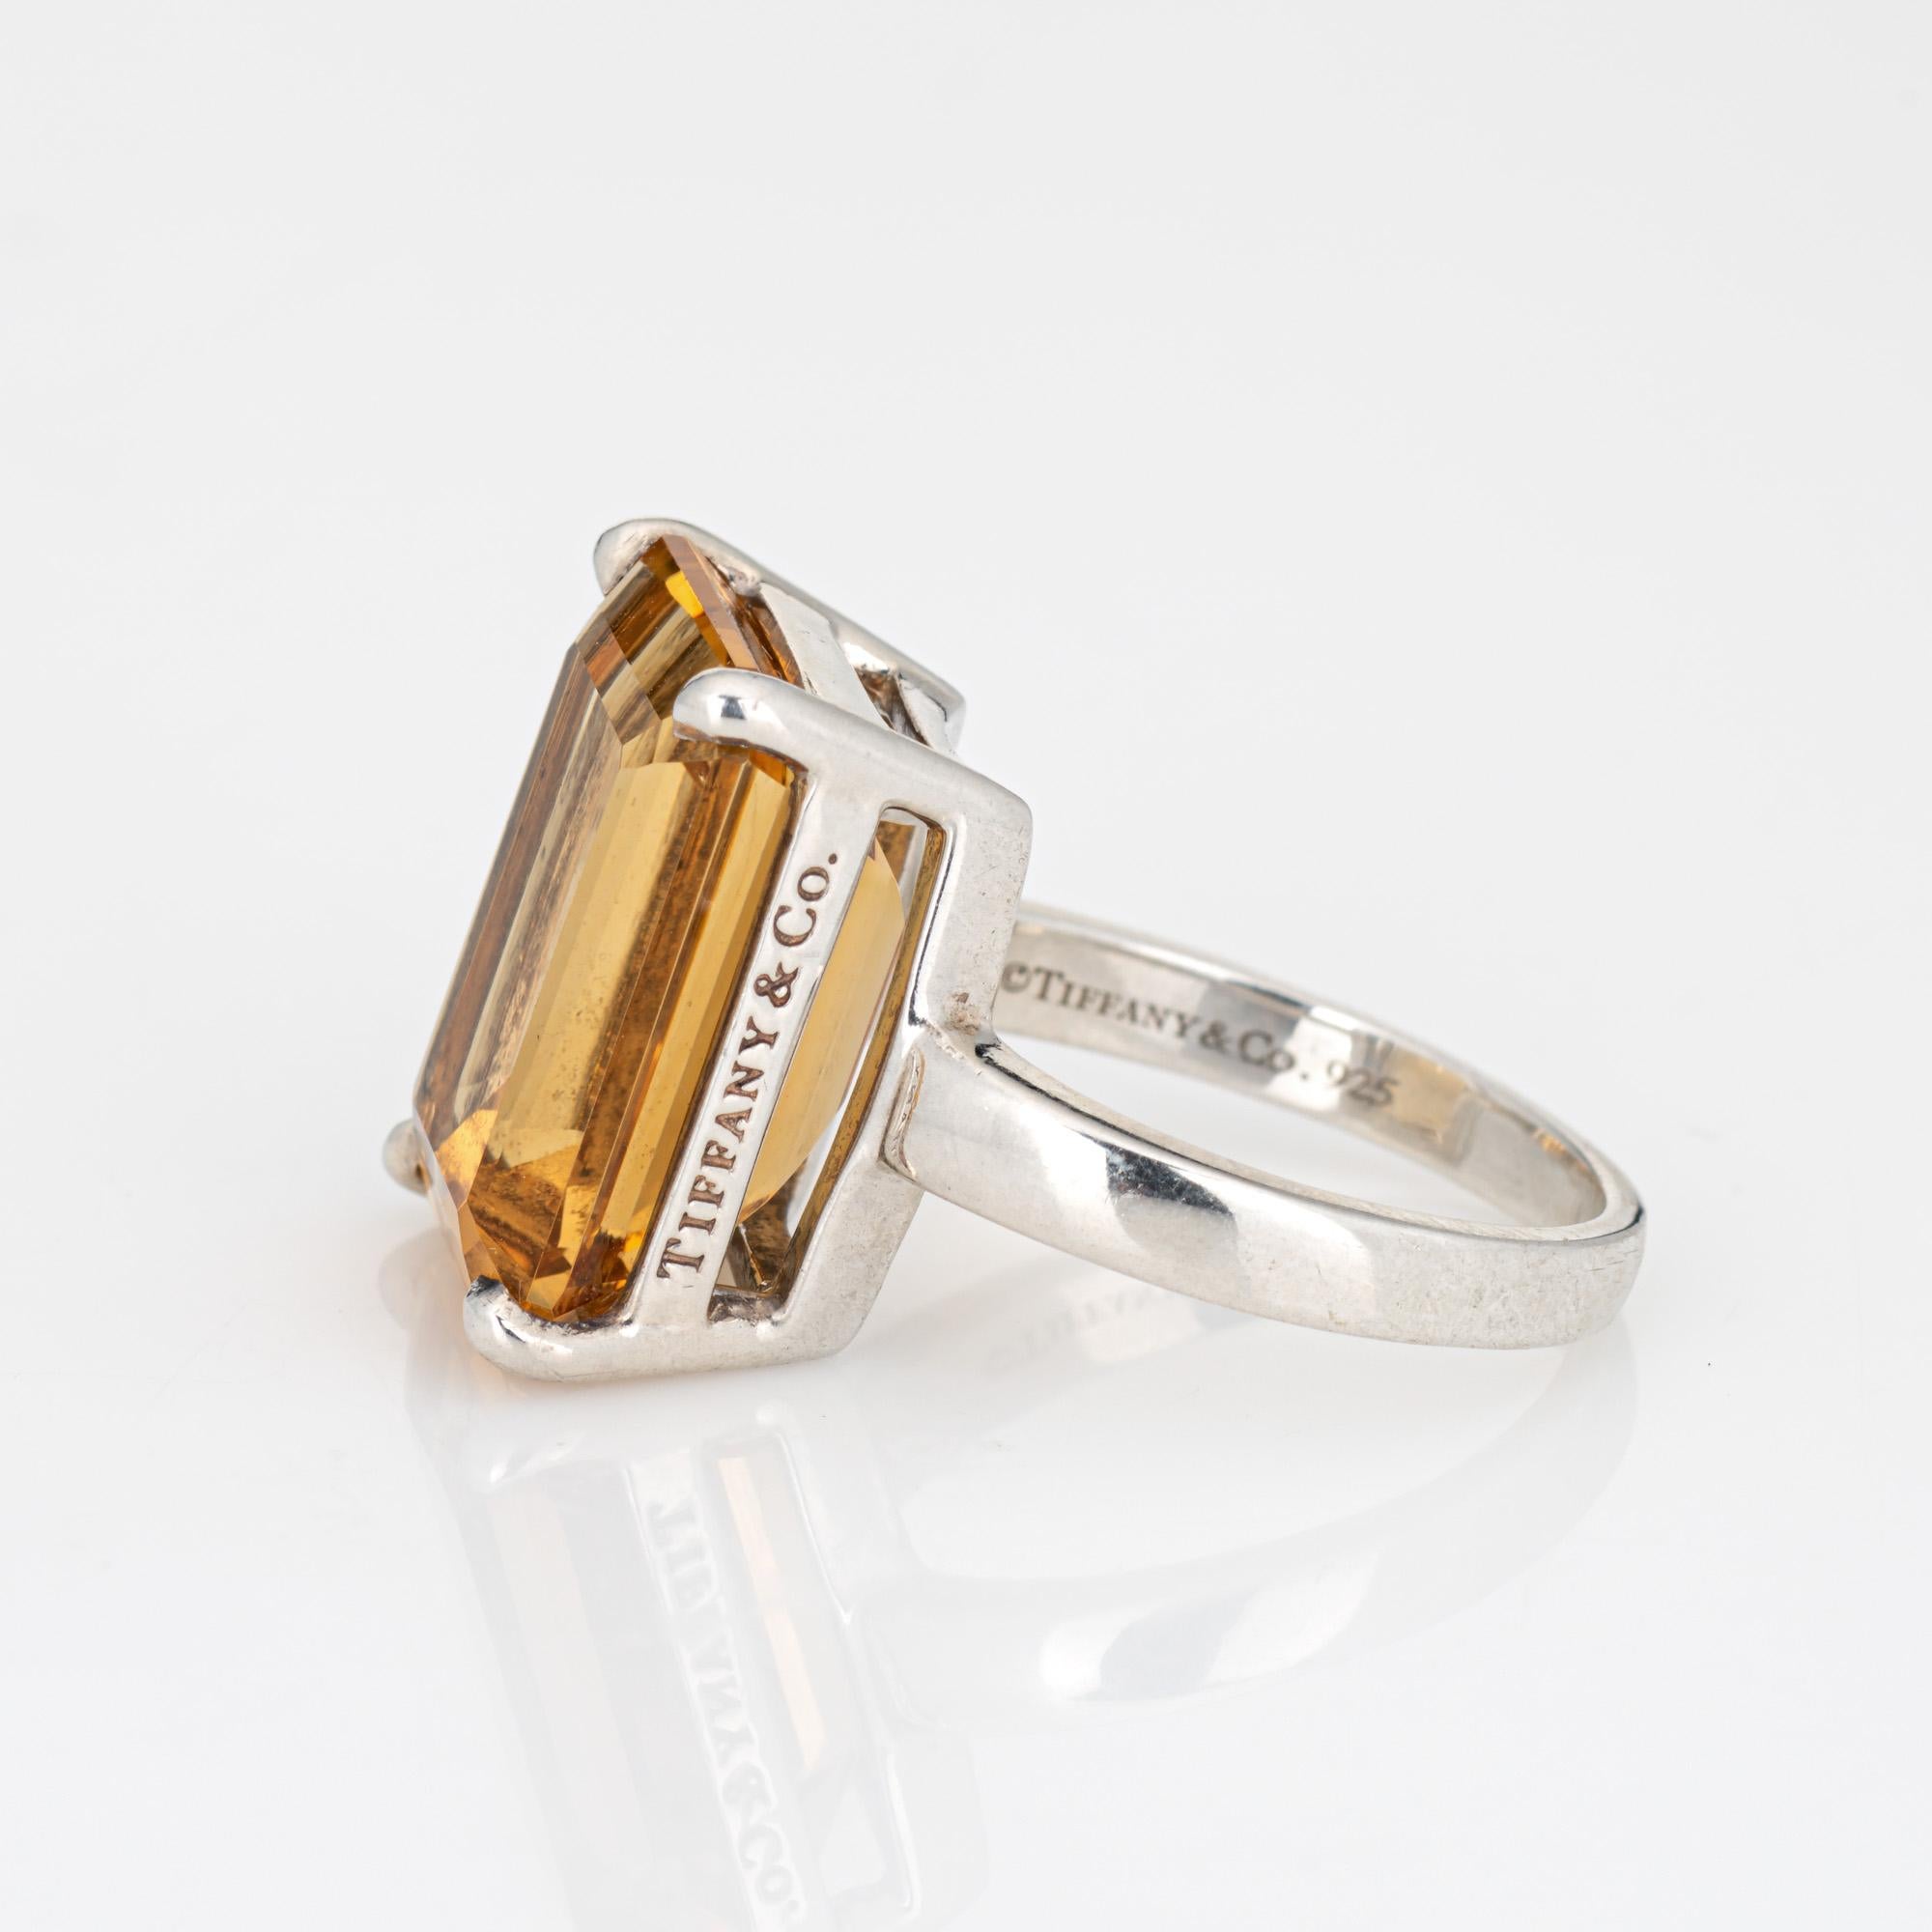 Emerald Cut Tiffany & Co 10ct Citrine Ring Sparklers Sterling Silver 8 Fine Jewelry 